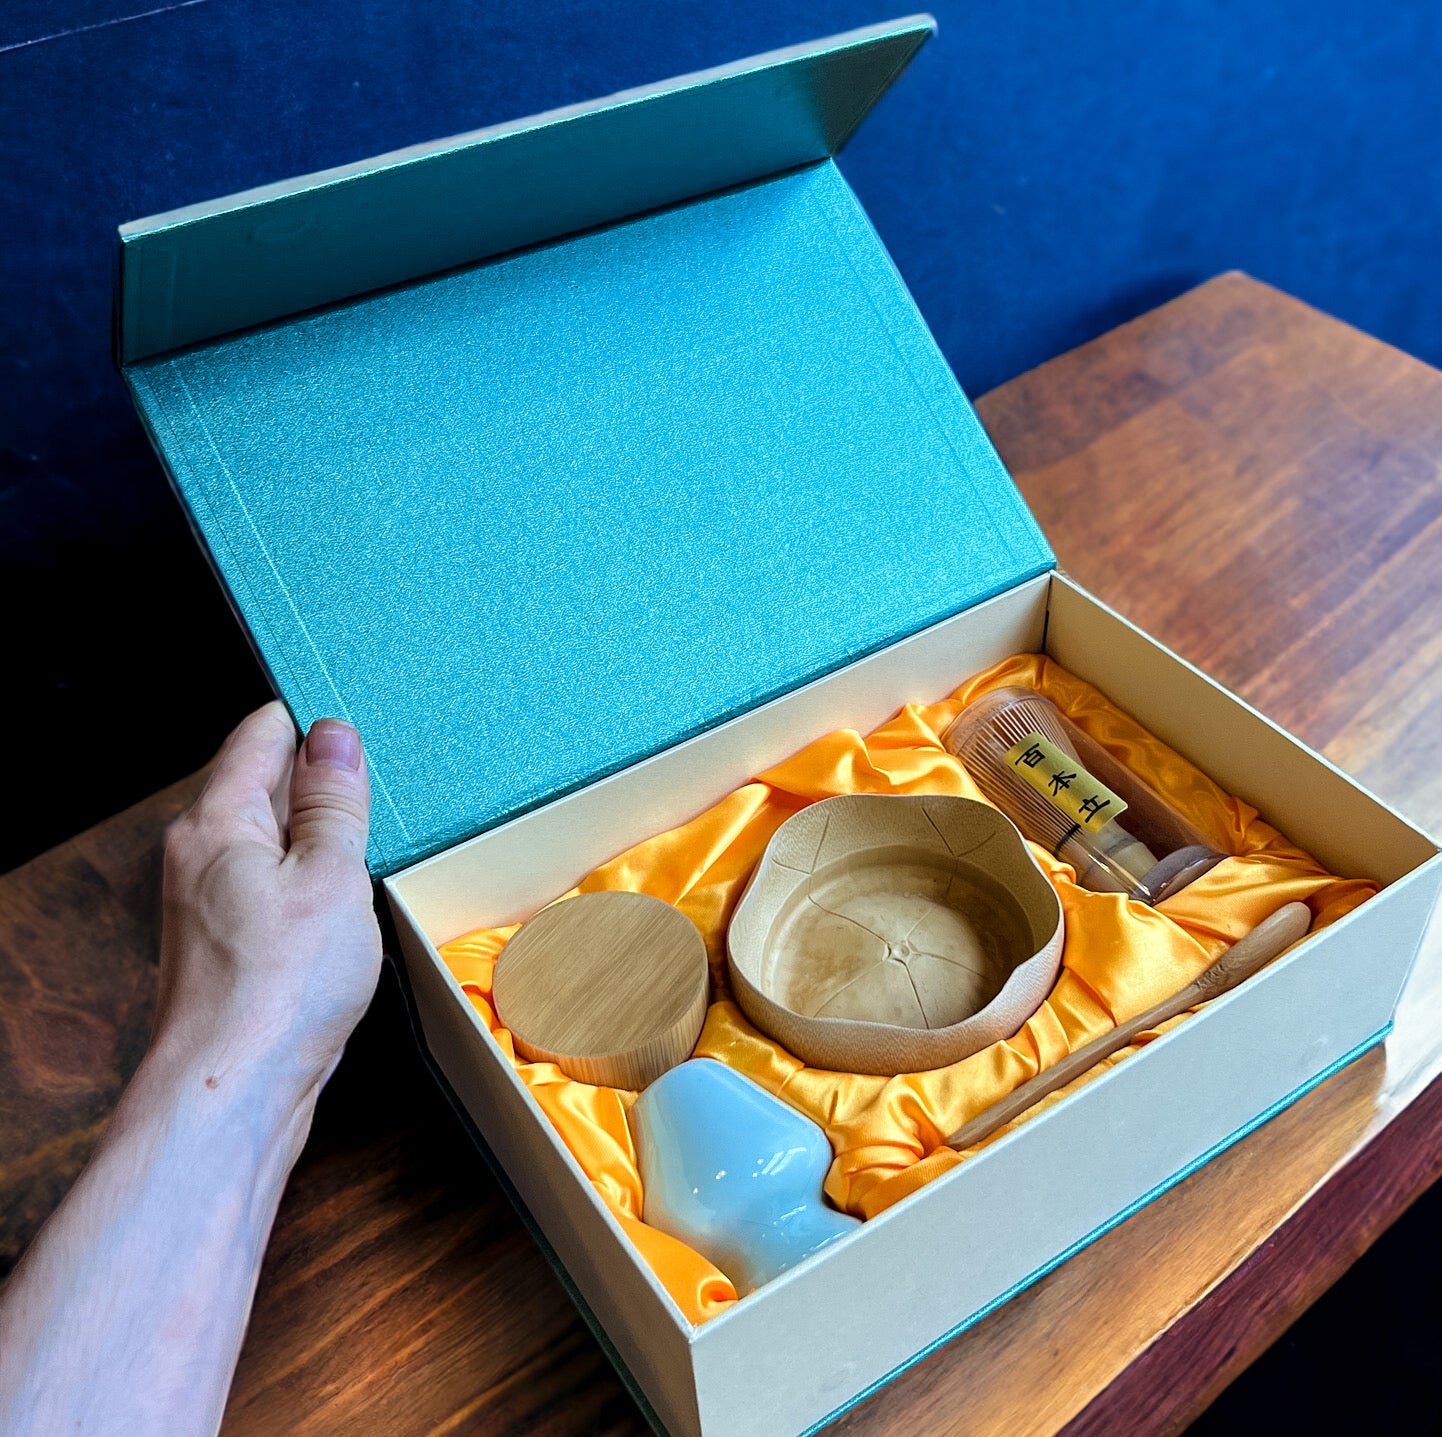 The Bamboo matcha set in its box